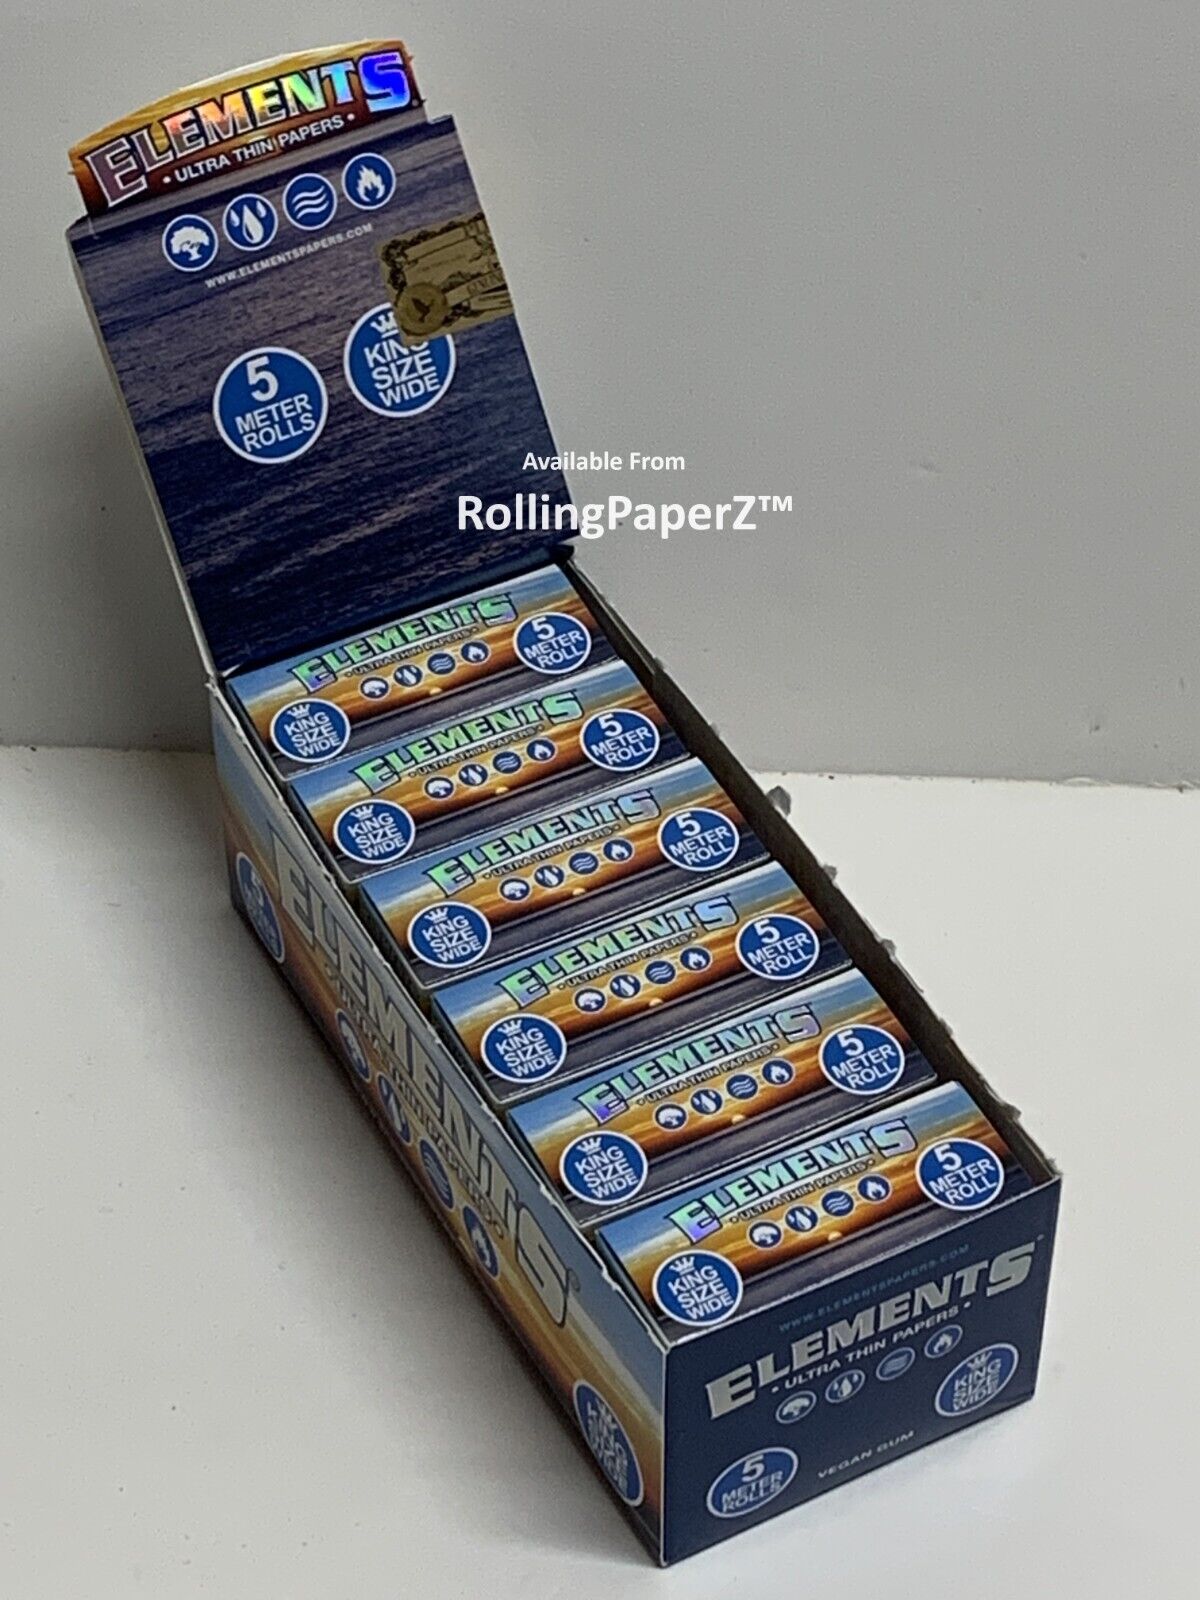 ELEMENTS PAPERS ON ROLLS - KIng Size Wide - 5 Meters length - 12 rolls per box